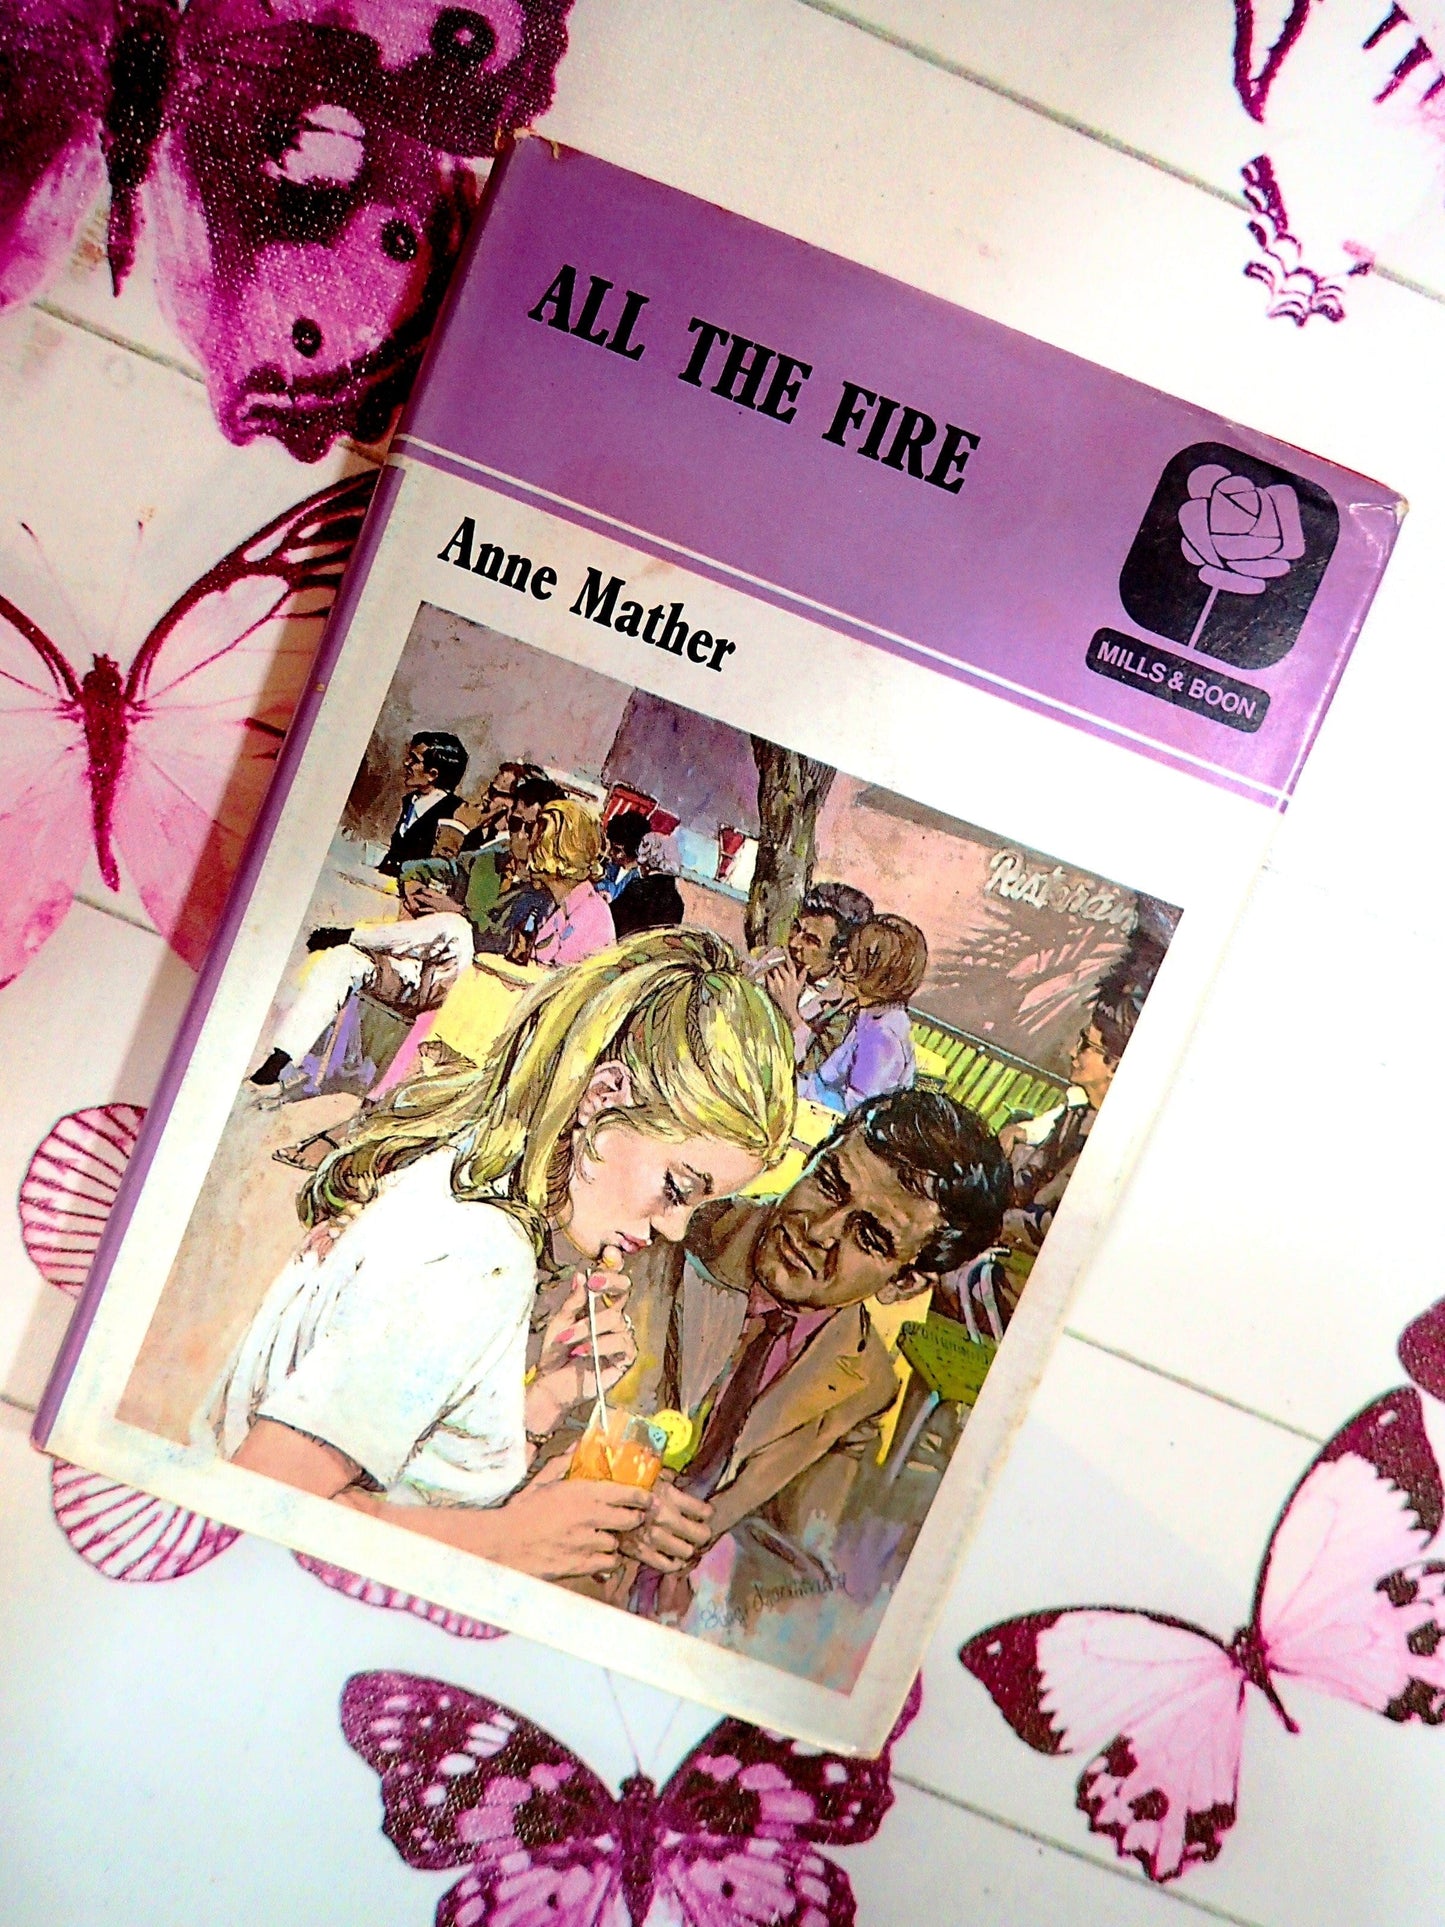 Anne Mather All the Fire Vintage Mills and Boon First Edition Old Romance Book